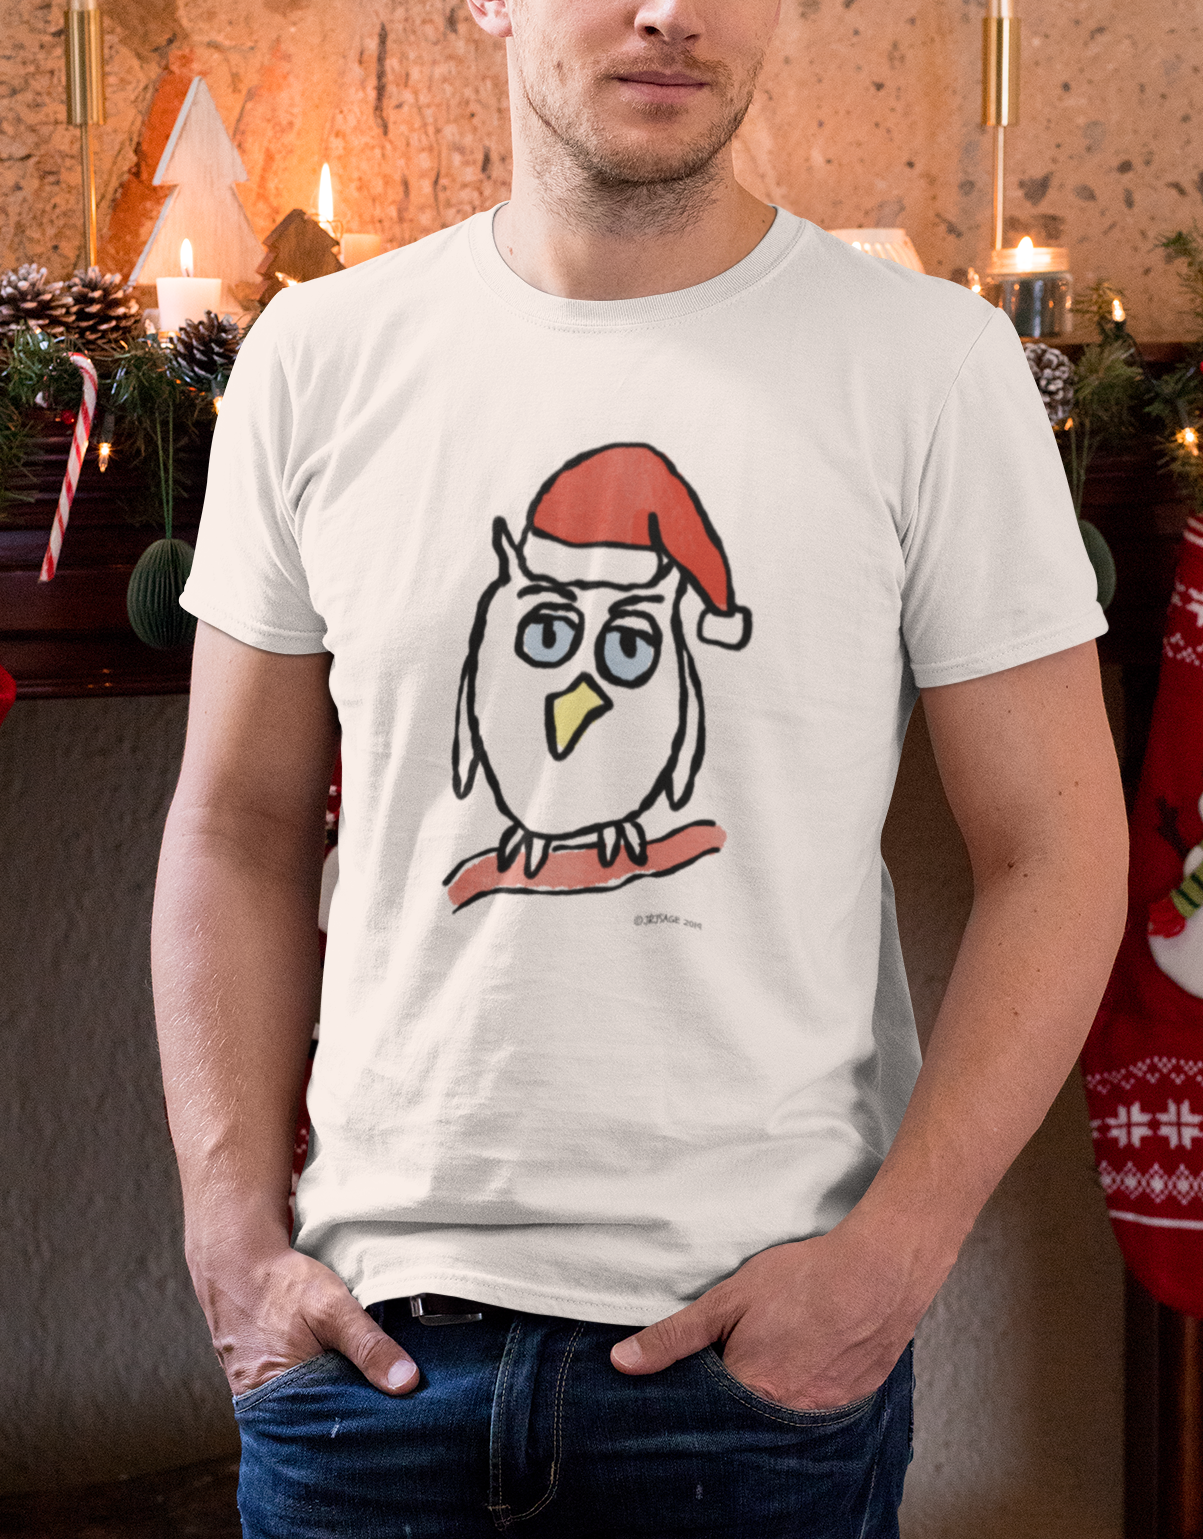 Young man wearing a Santa Night Owl cute Christmas T-shirt illustrated design by Hector and Bone on a vegan cotton t-shirt